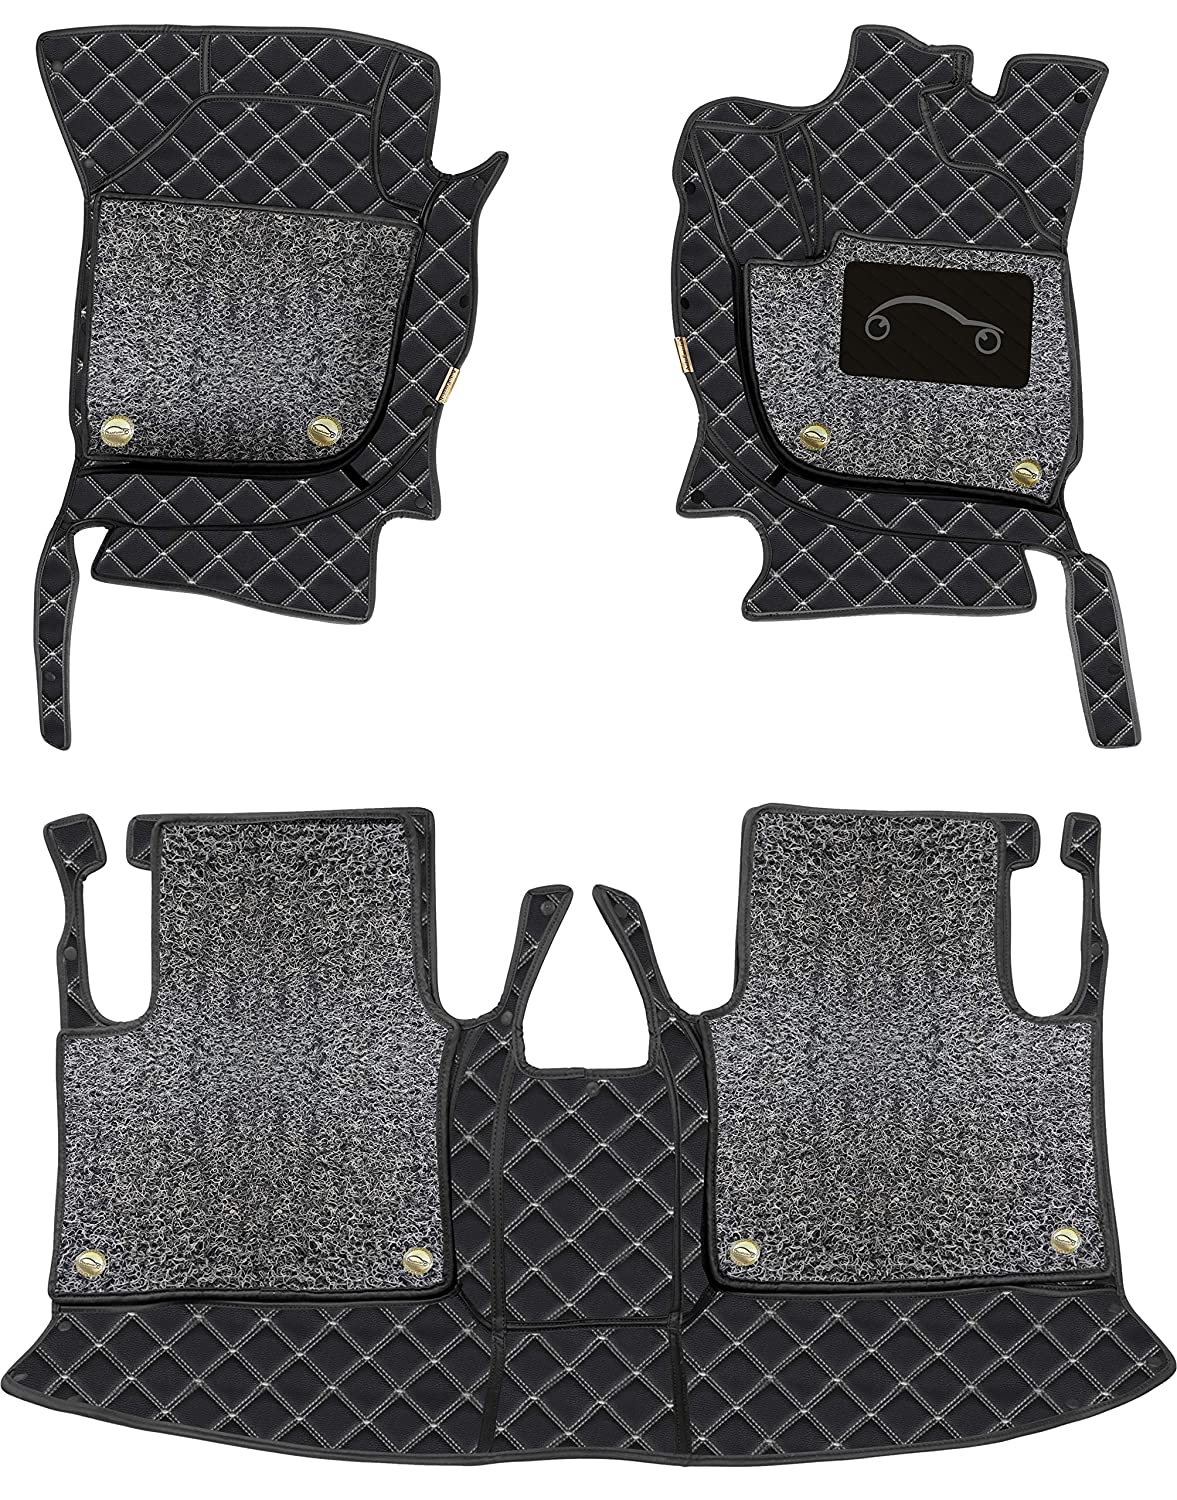 Porsche Panamera 4 2011 7D Luxury Car Mat, All Weather Proof, Anti-Skid, 100% Waterproof & Odorless with Unique Diamond Fish Design (24mm Luxury PU Leather, 2 Rows)